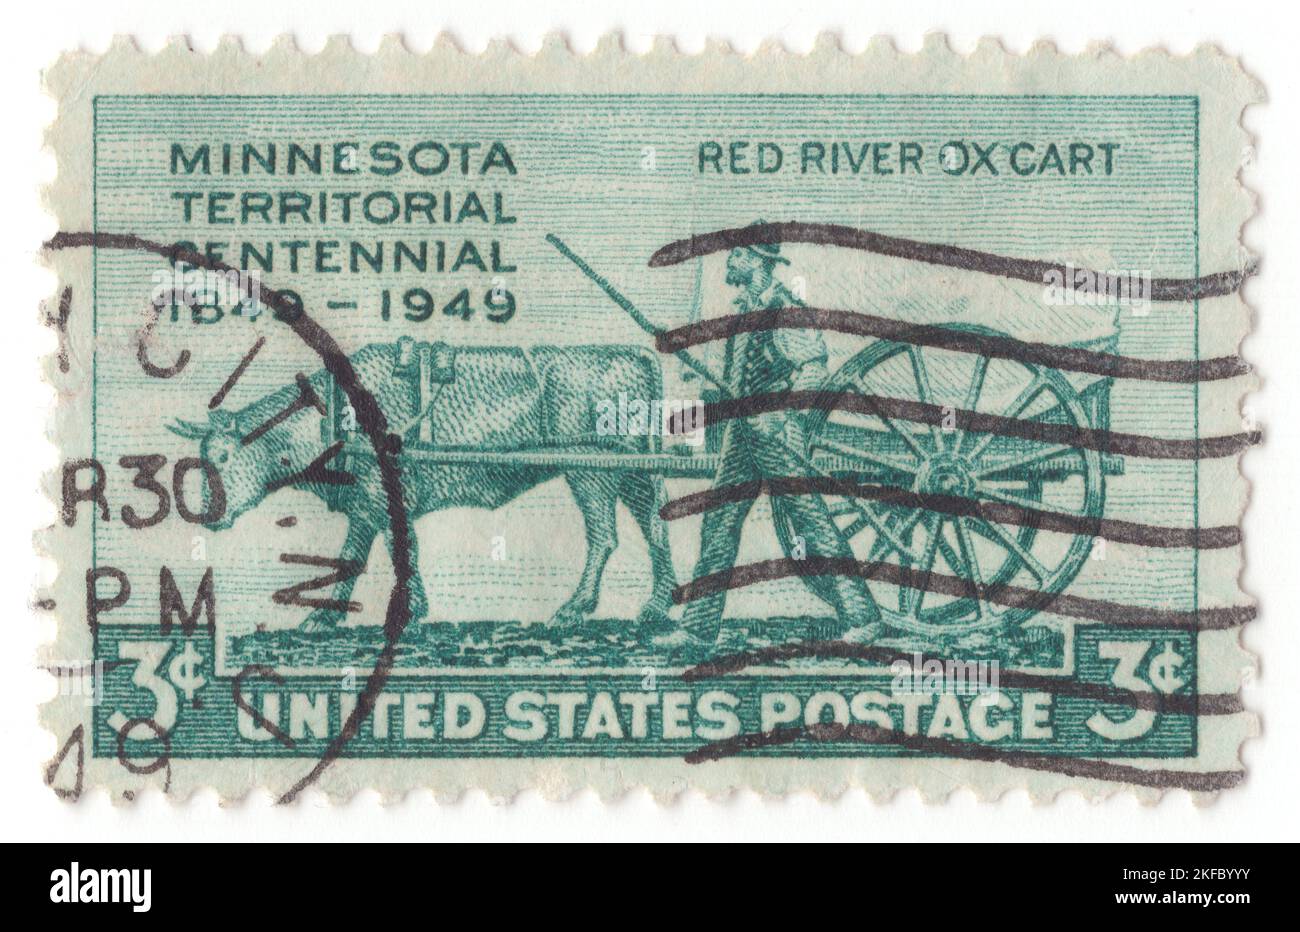 USA - 1949 March 3: An 3 cent blue-green postage stamp depicting Pioneer and Red River Ox Cart. Minnesota Territory Issue. Centenary of the establishment of Minnesota Territory Stock Photo